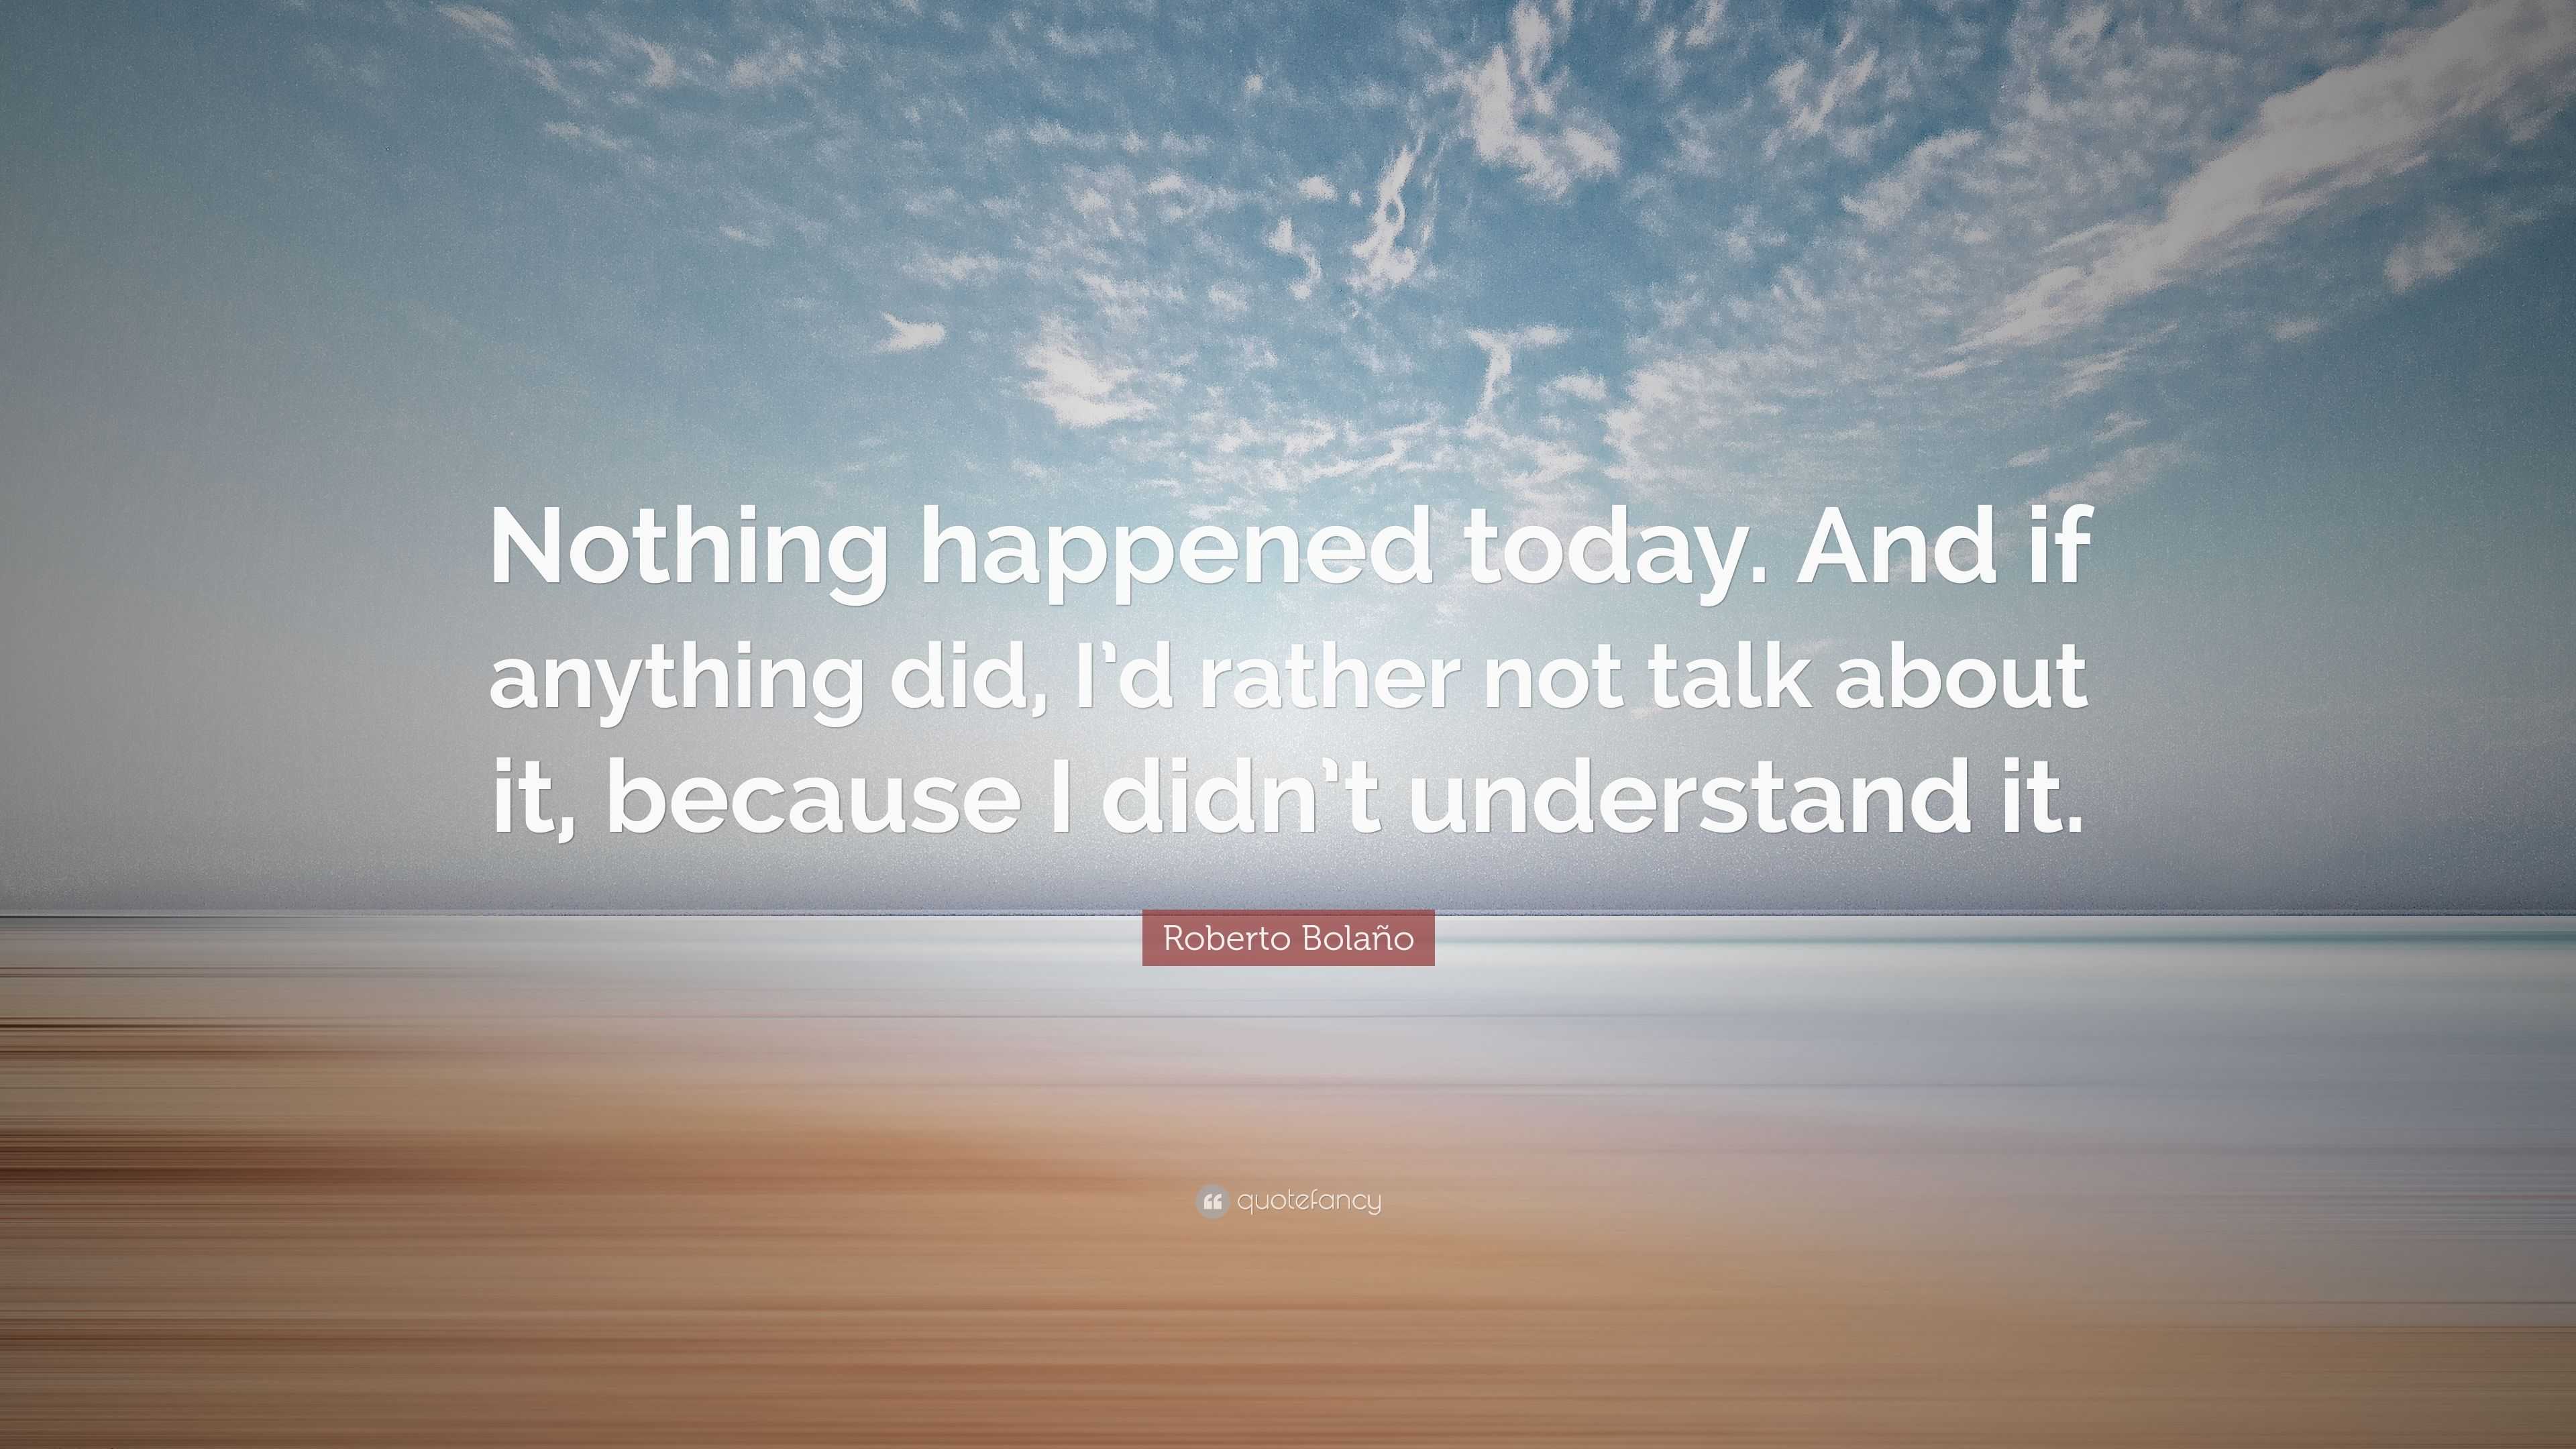 Roberto Bolaño Quote: “Nothing happened today. And if anything did, I’d ...